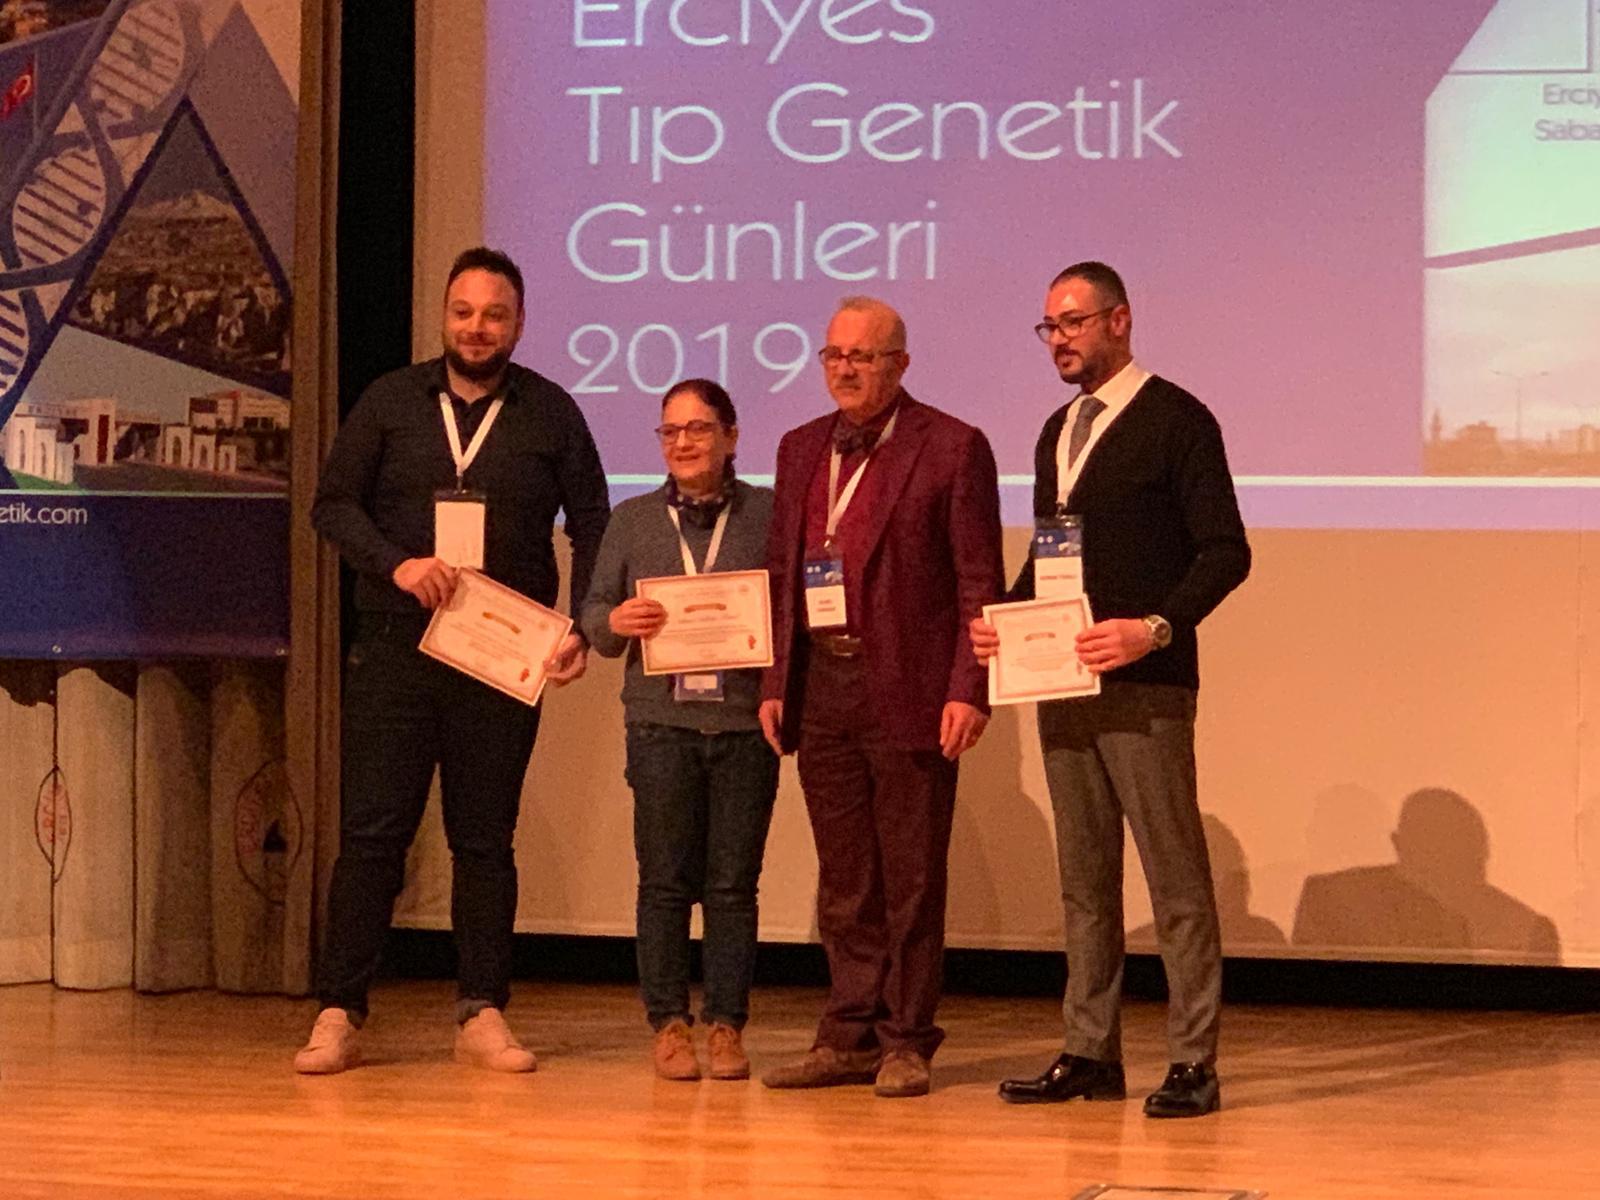 3 Awards go to the Near East University at the “Erciyes Medical Genetics Days 2019“